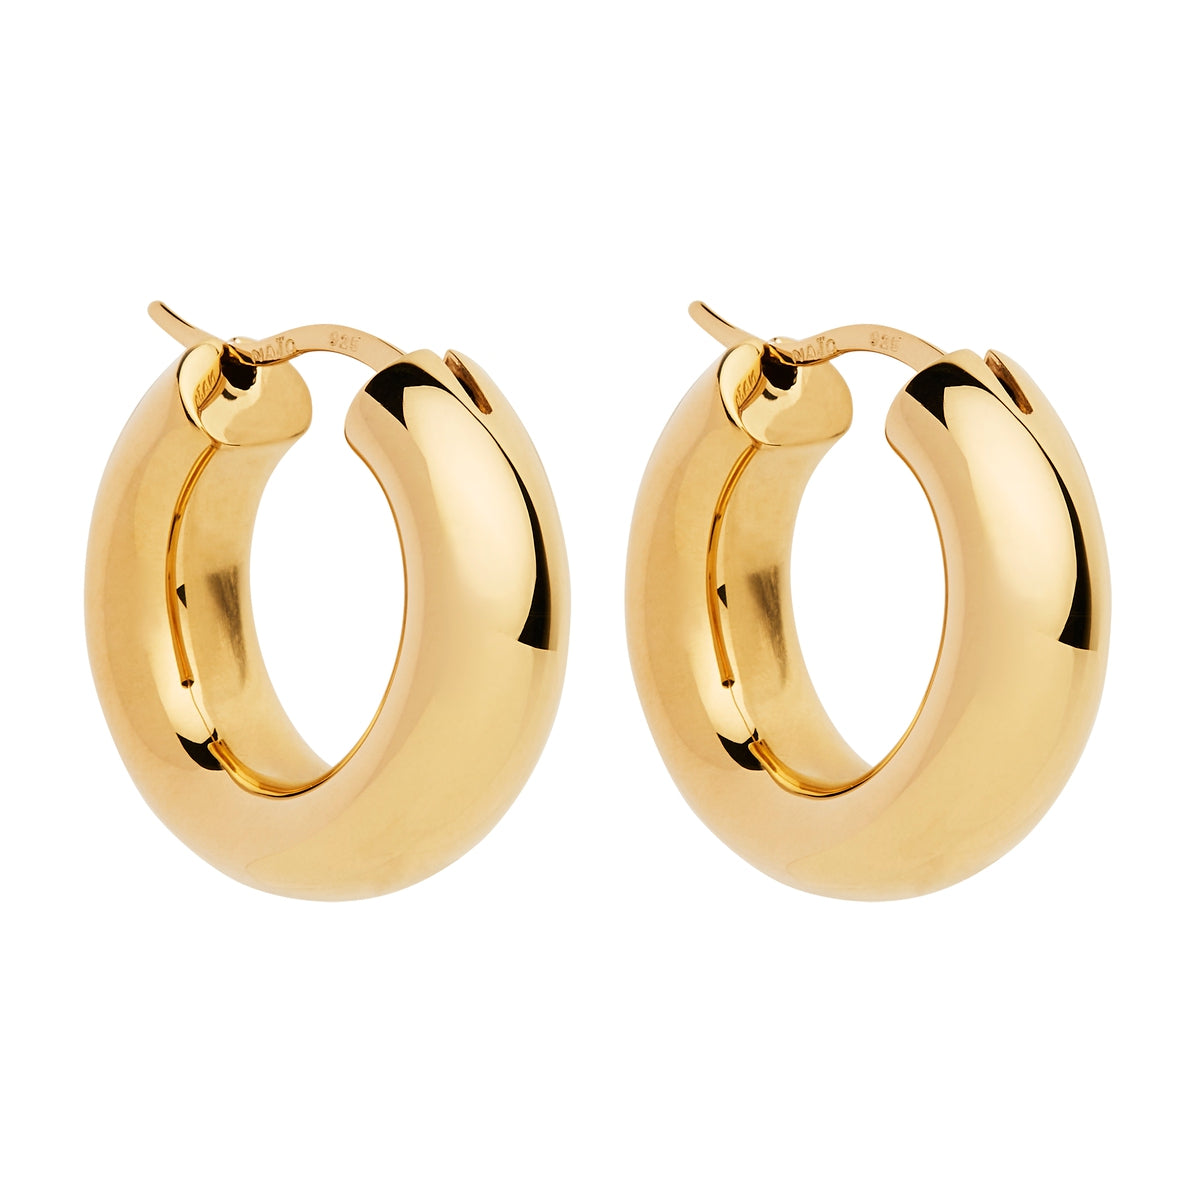 Chunky yellow gold plated hoops